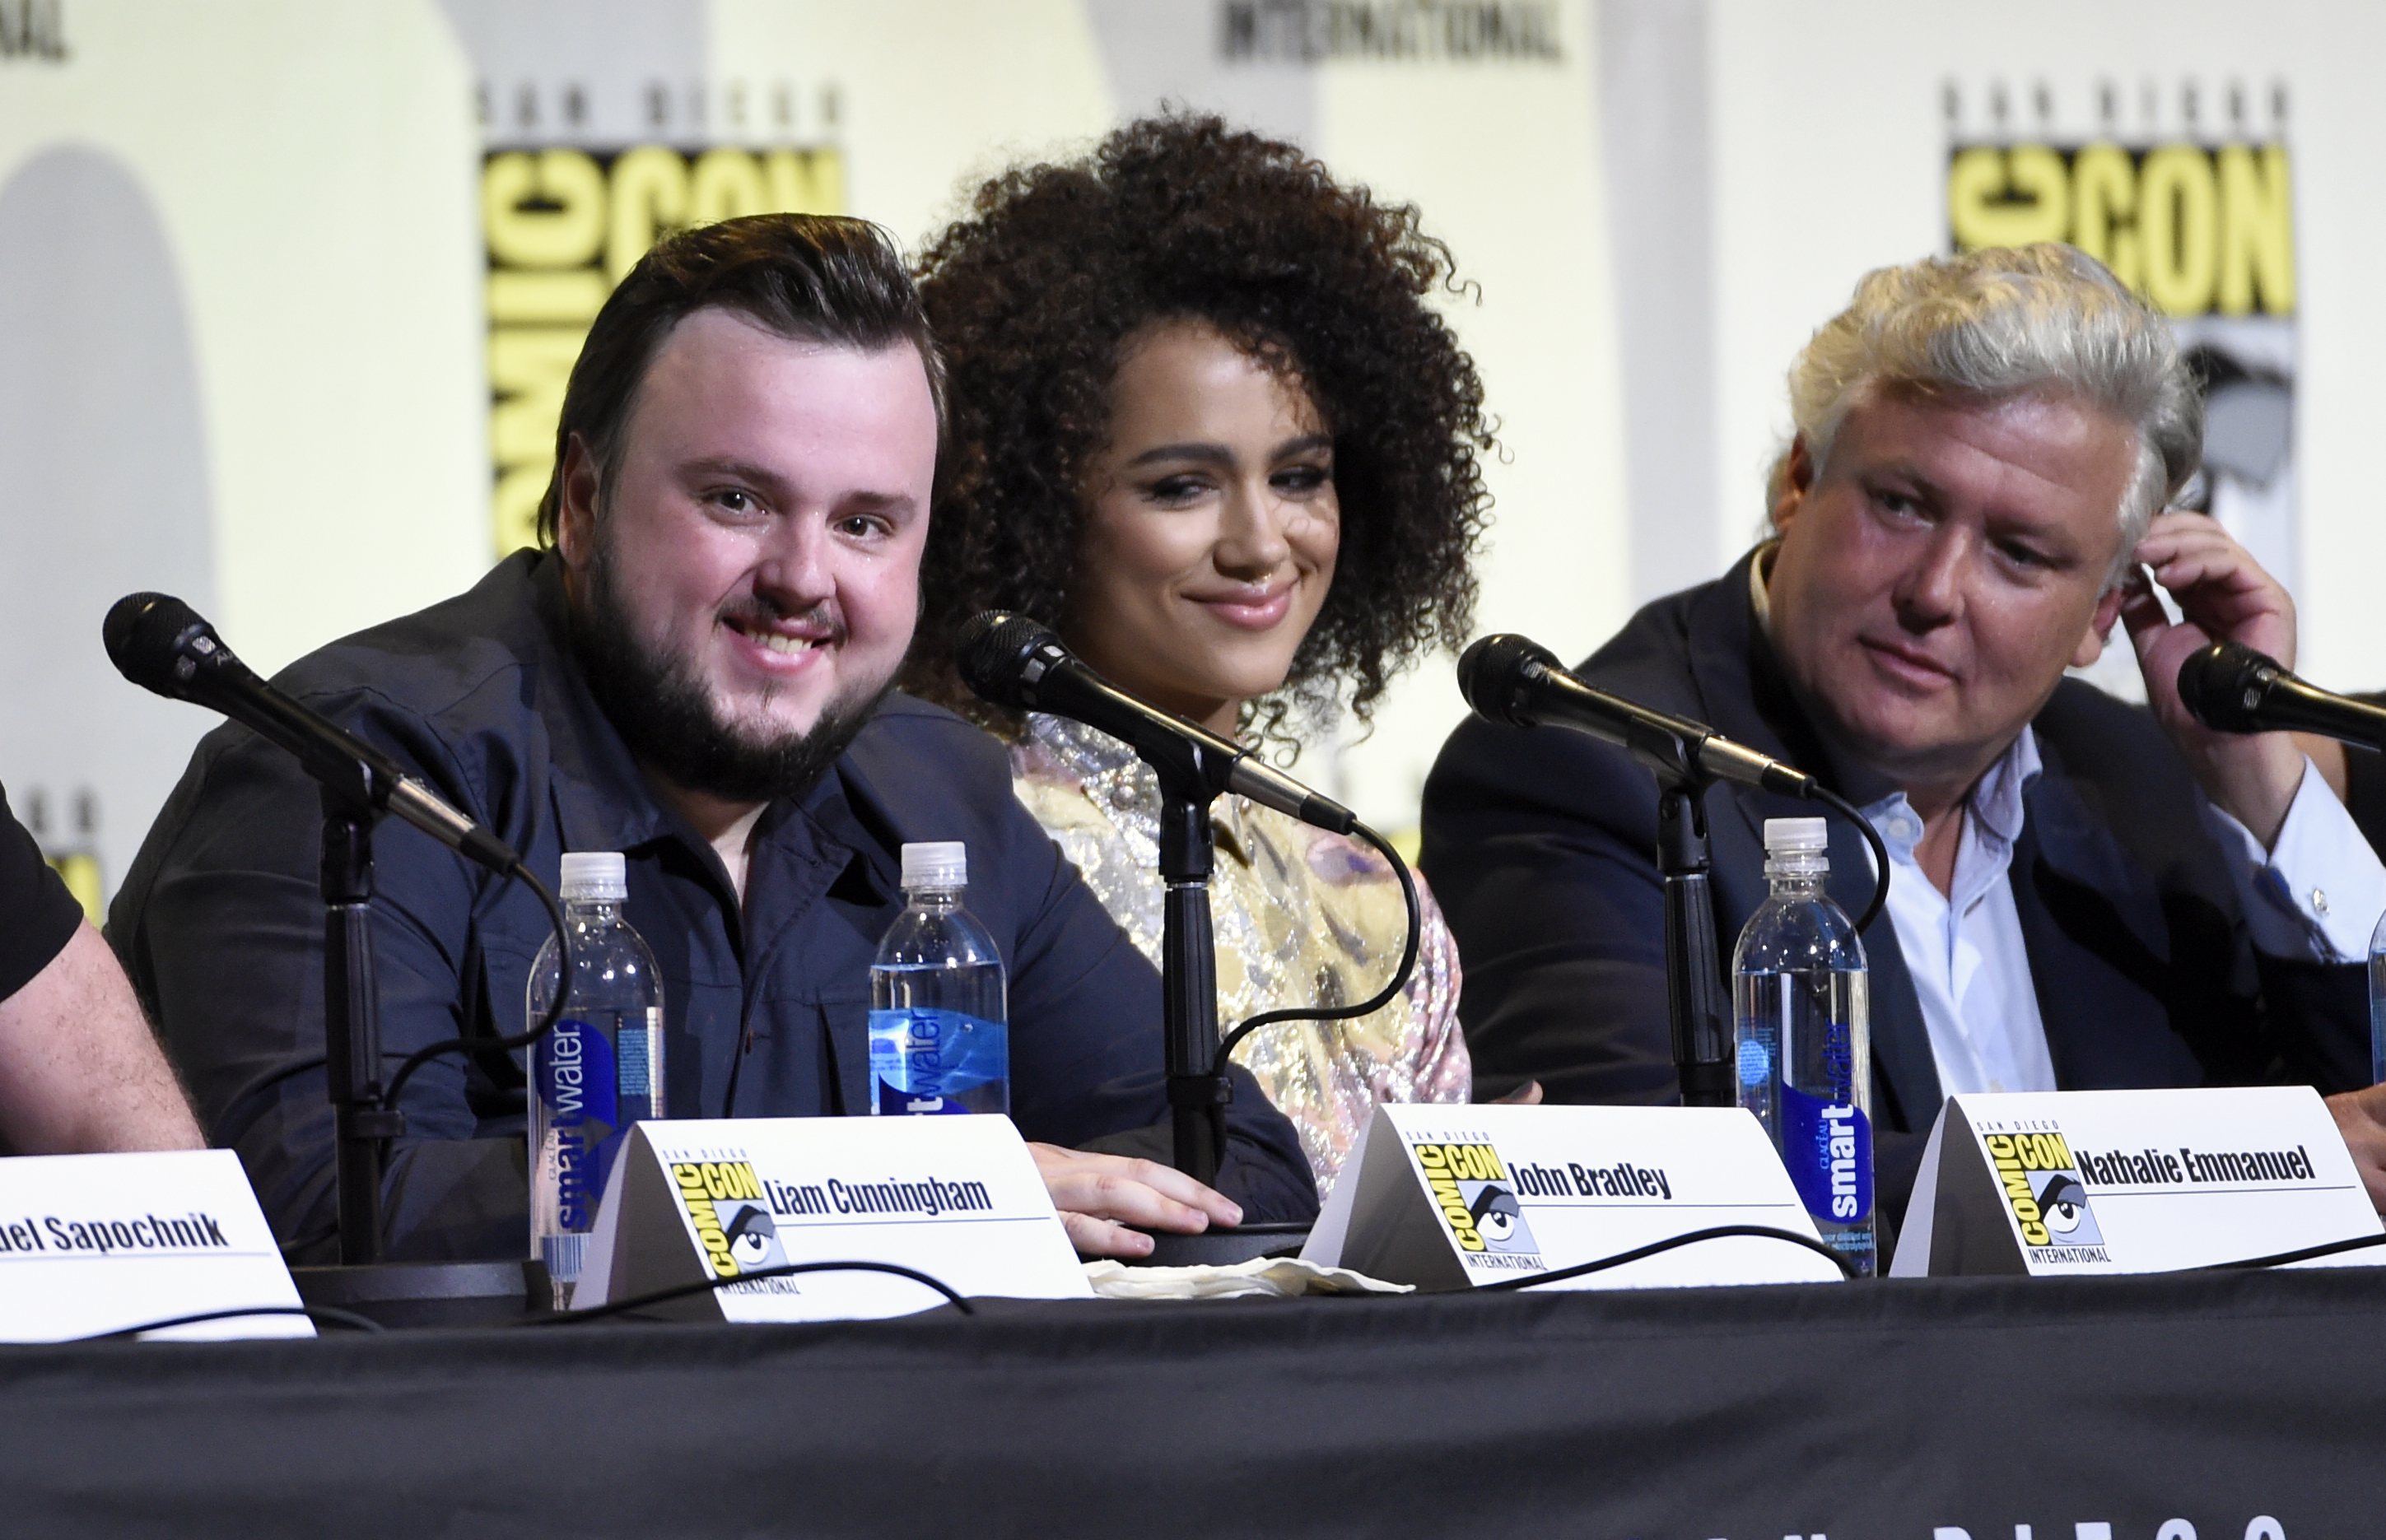 John Bradley, from left, Nathalie Emmanuel and Conleth Hill attend the "Game of Thrones" panel on day 2 of Comic-Con International on Friday, July 22, 2016, in San Diego. (Photo by Chris Pizzello/Invision/AP)